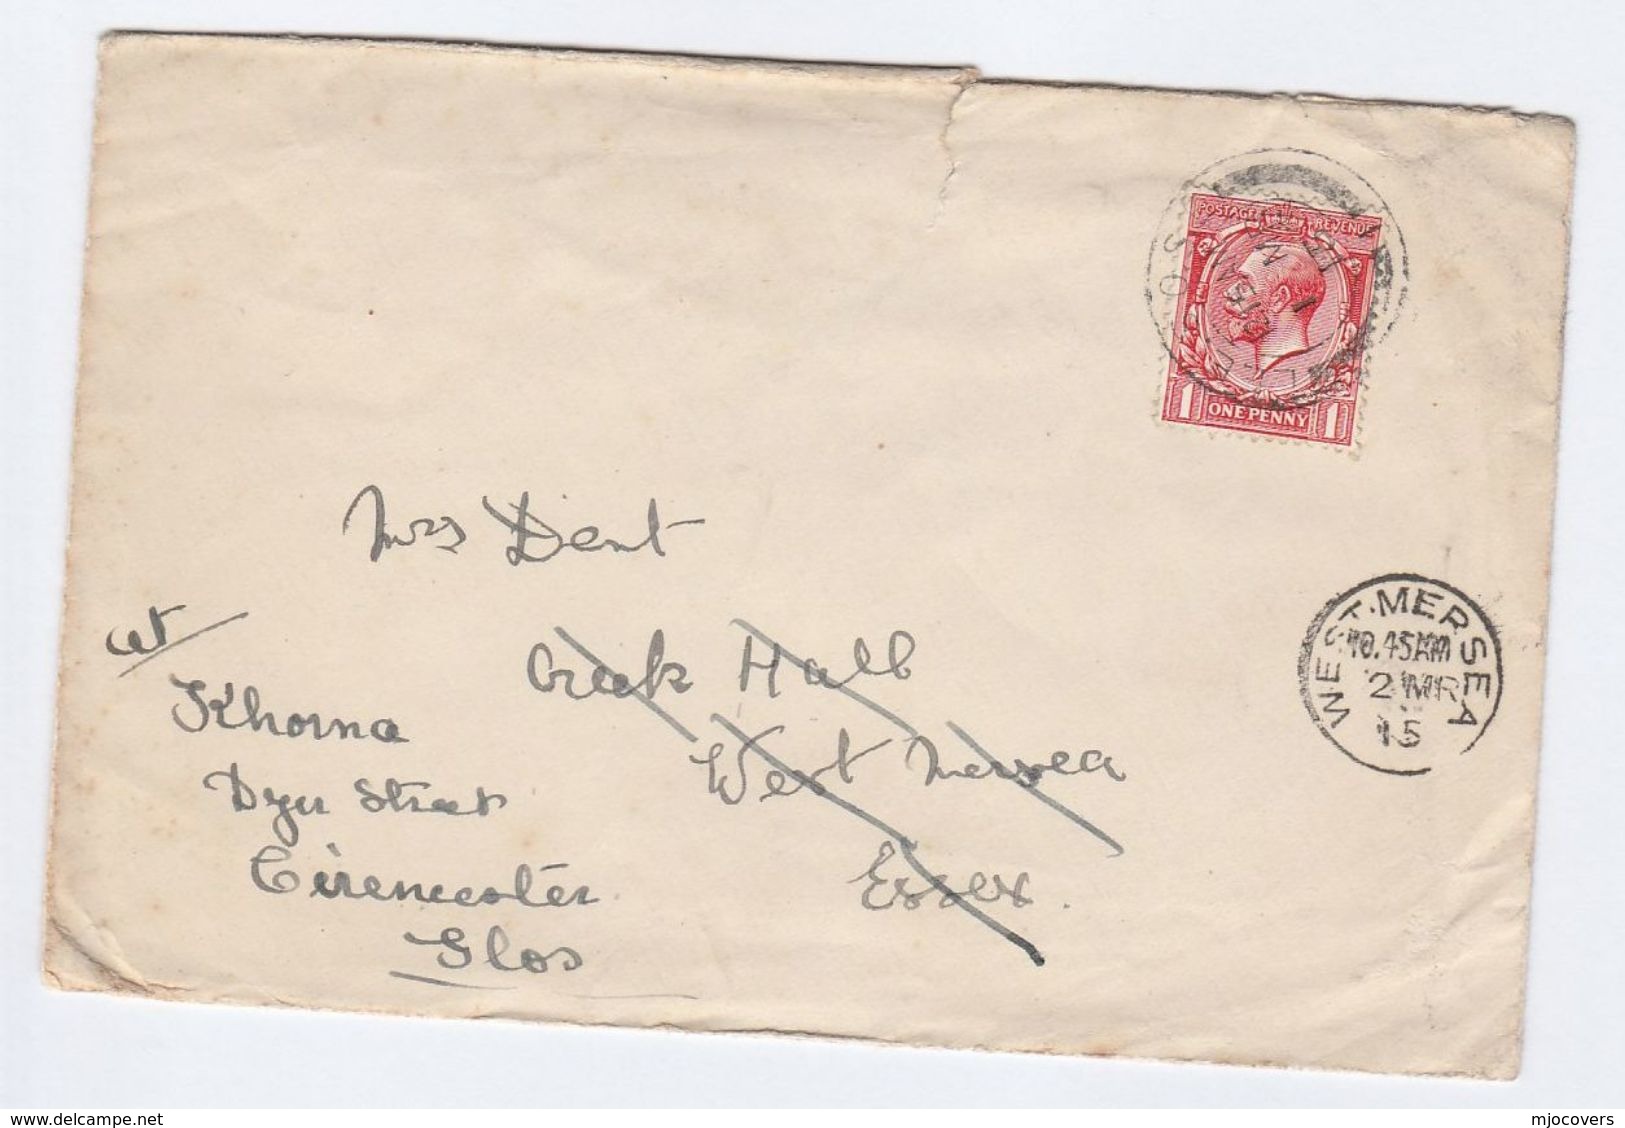 1915 GB COVER  'LEE.S.O.S.E.'  &  WEST MERCEA Cds , REDIRECTED To Cirencester, Gv Stamps - Covers & Documents